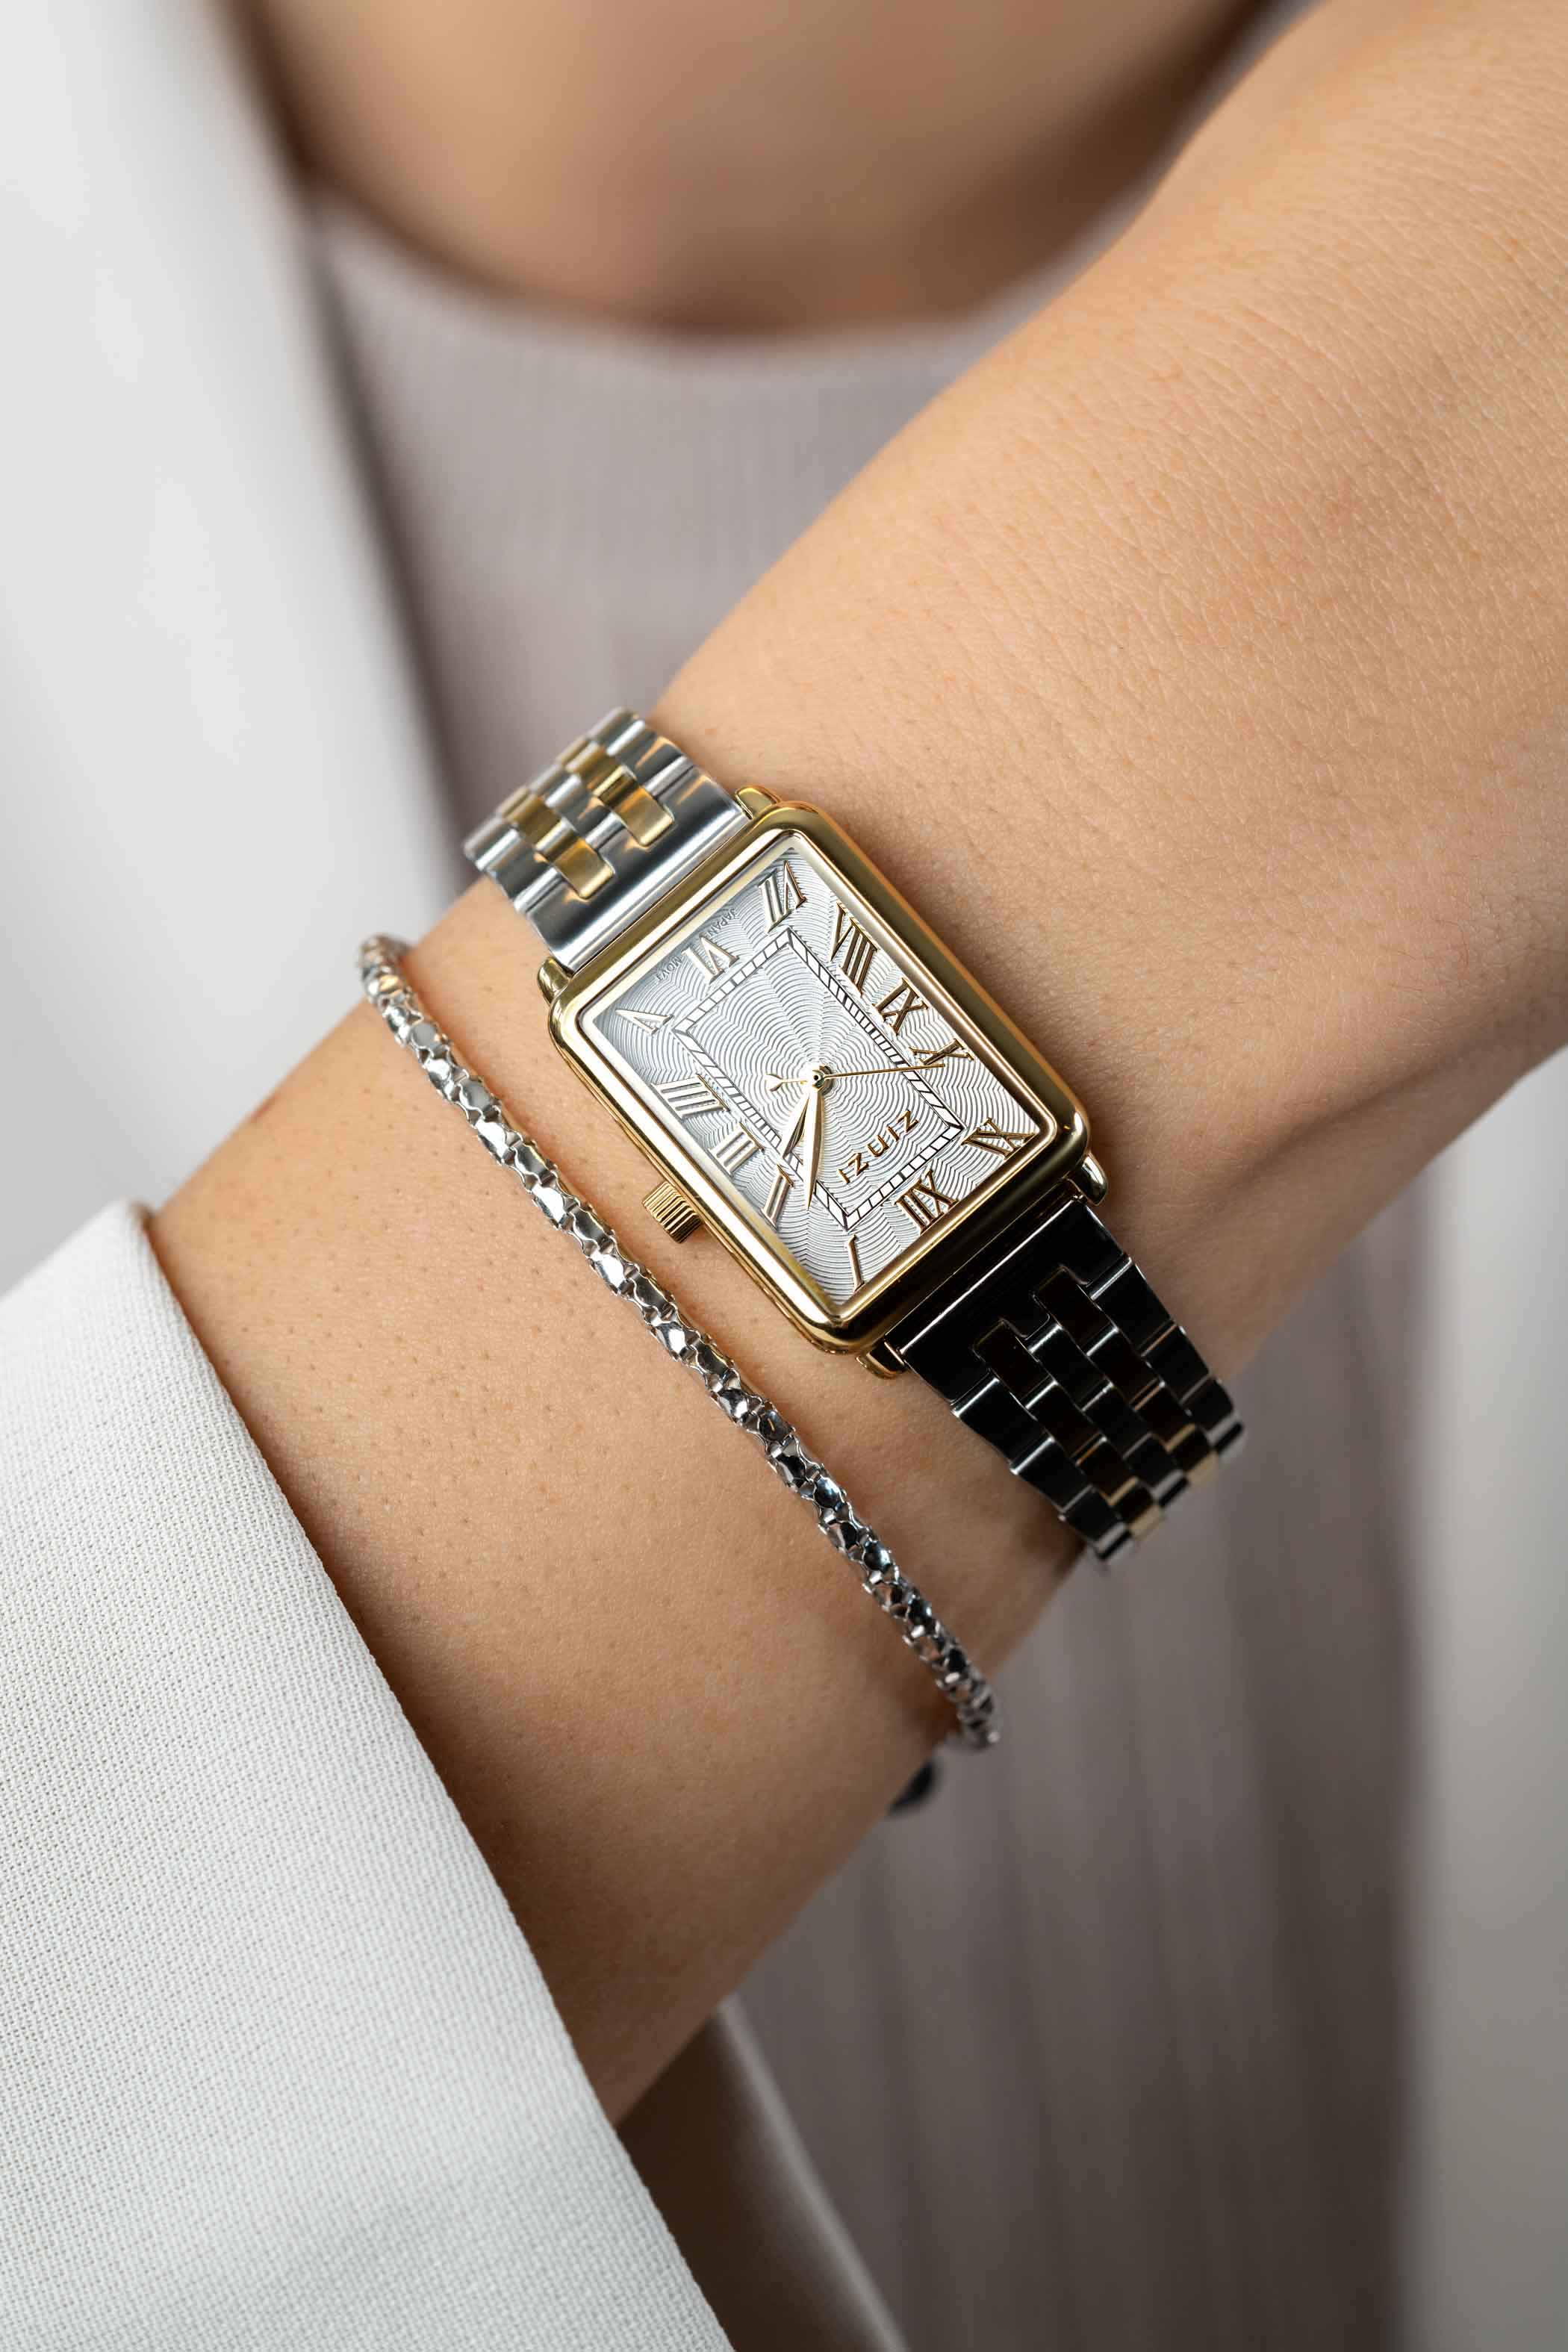 ZINZI Elegance bicolor Watch White Dial and Rectangular Gold Colored  Case and Bicolor Stainless Steel Chain Strap 28mm  ZIW1907